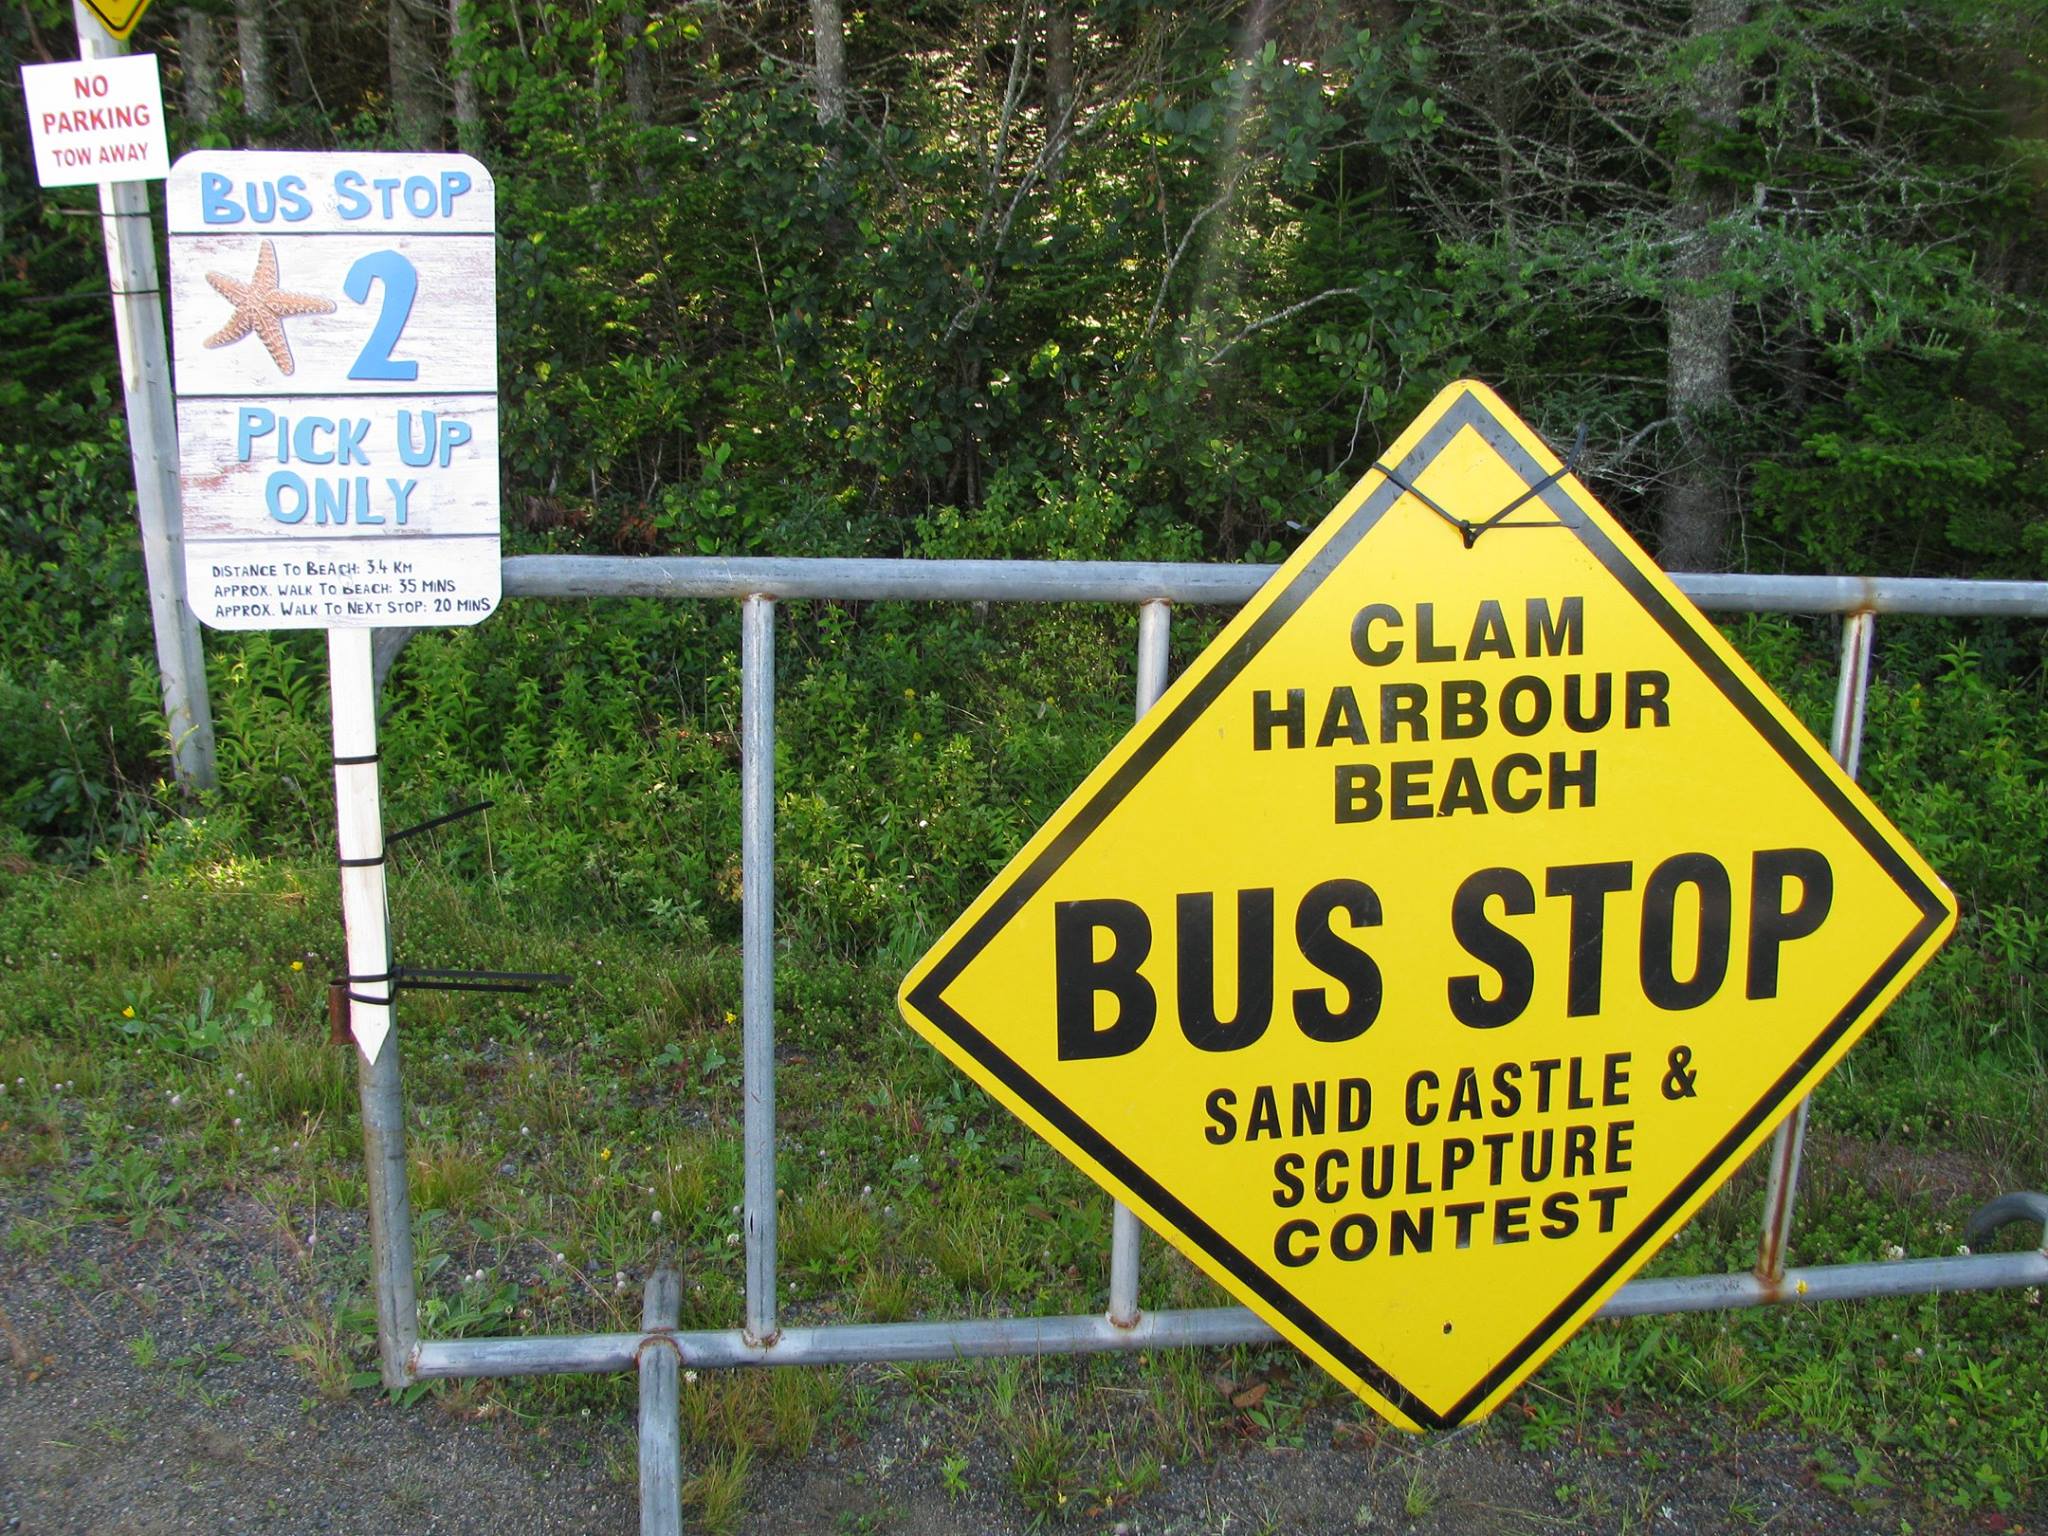 Example of a bus stop station, bright yellow sign on a barricade denoting the shuttle bus spot